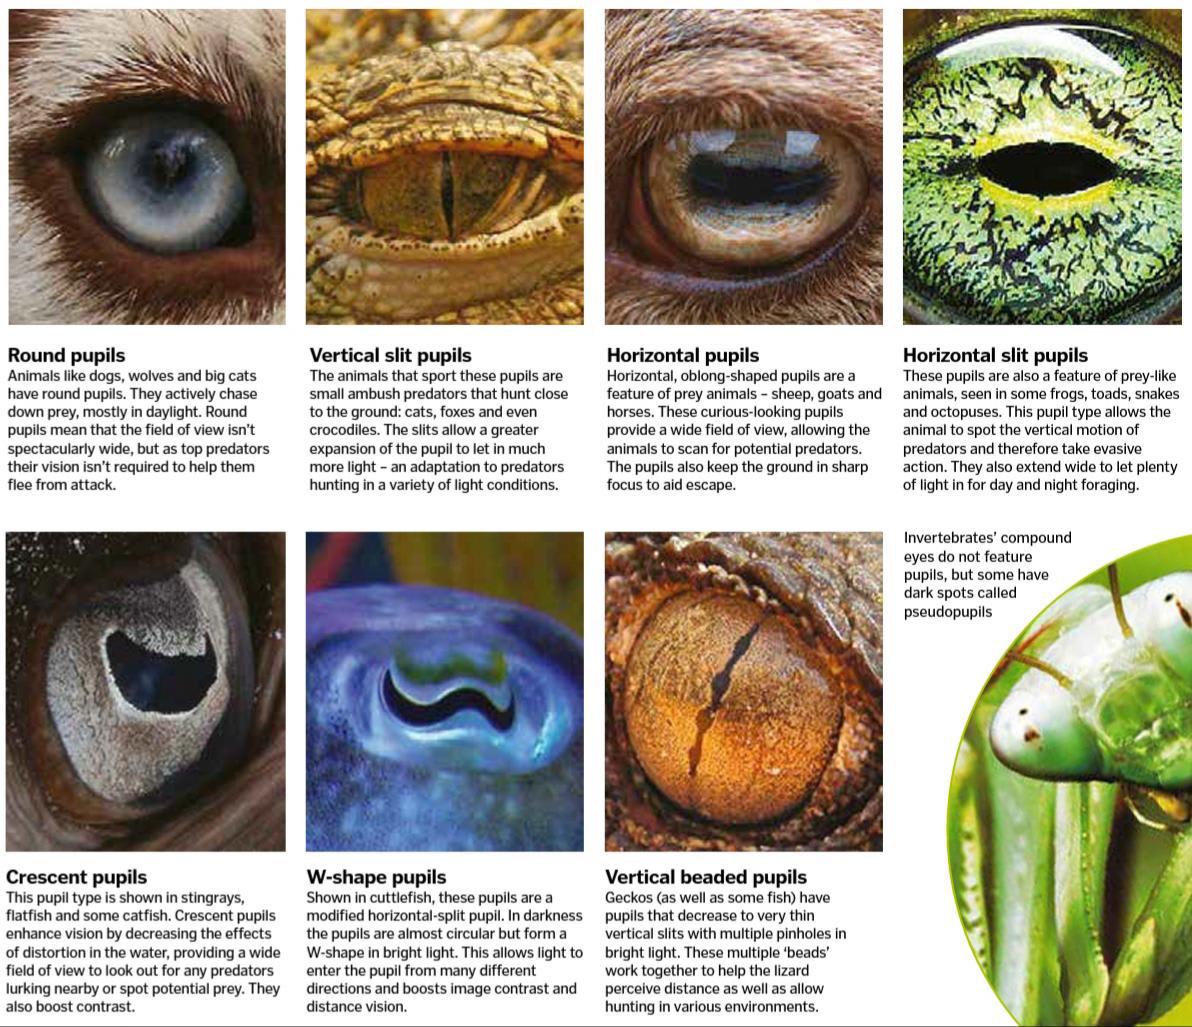 The who's and why's of Animal Eyes 👀